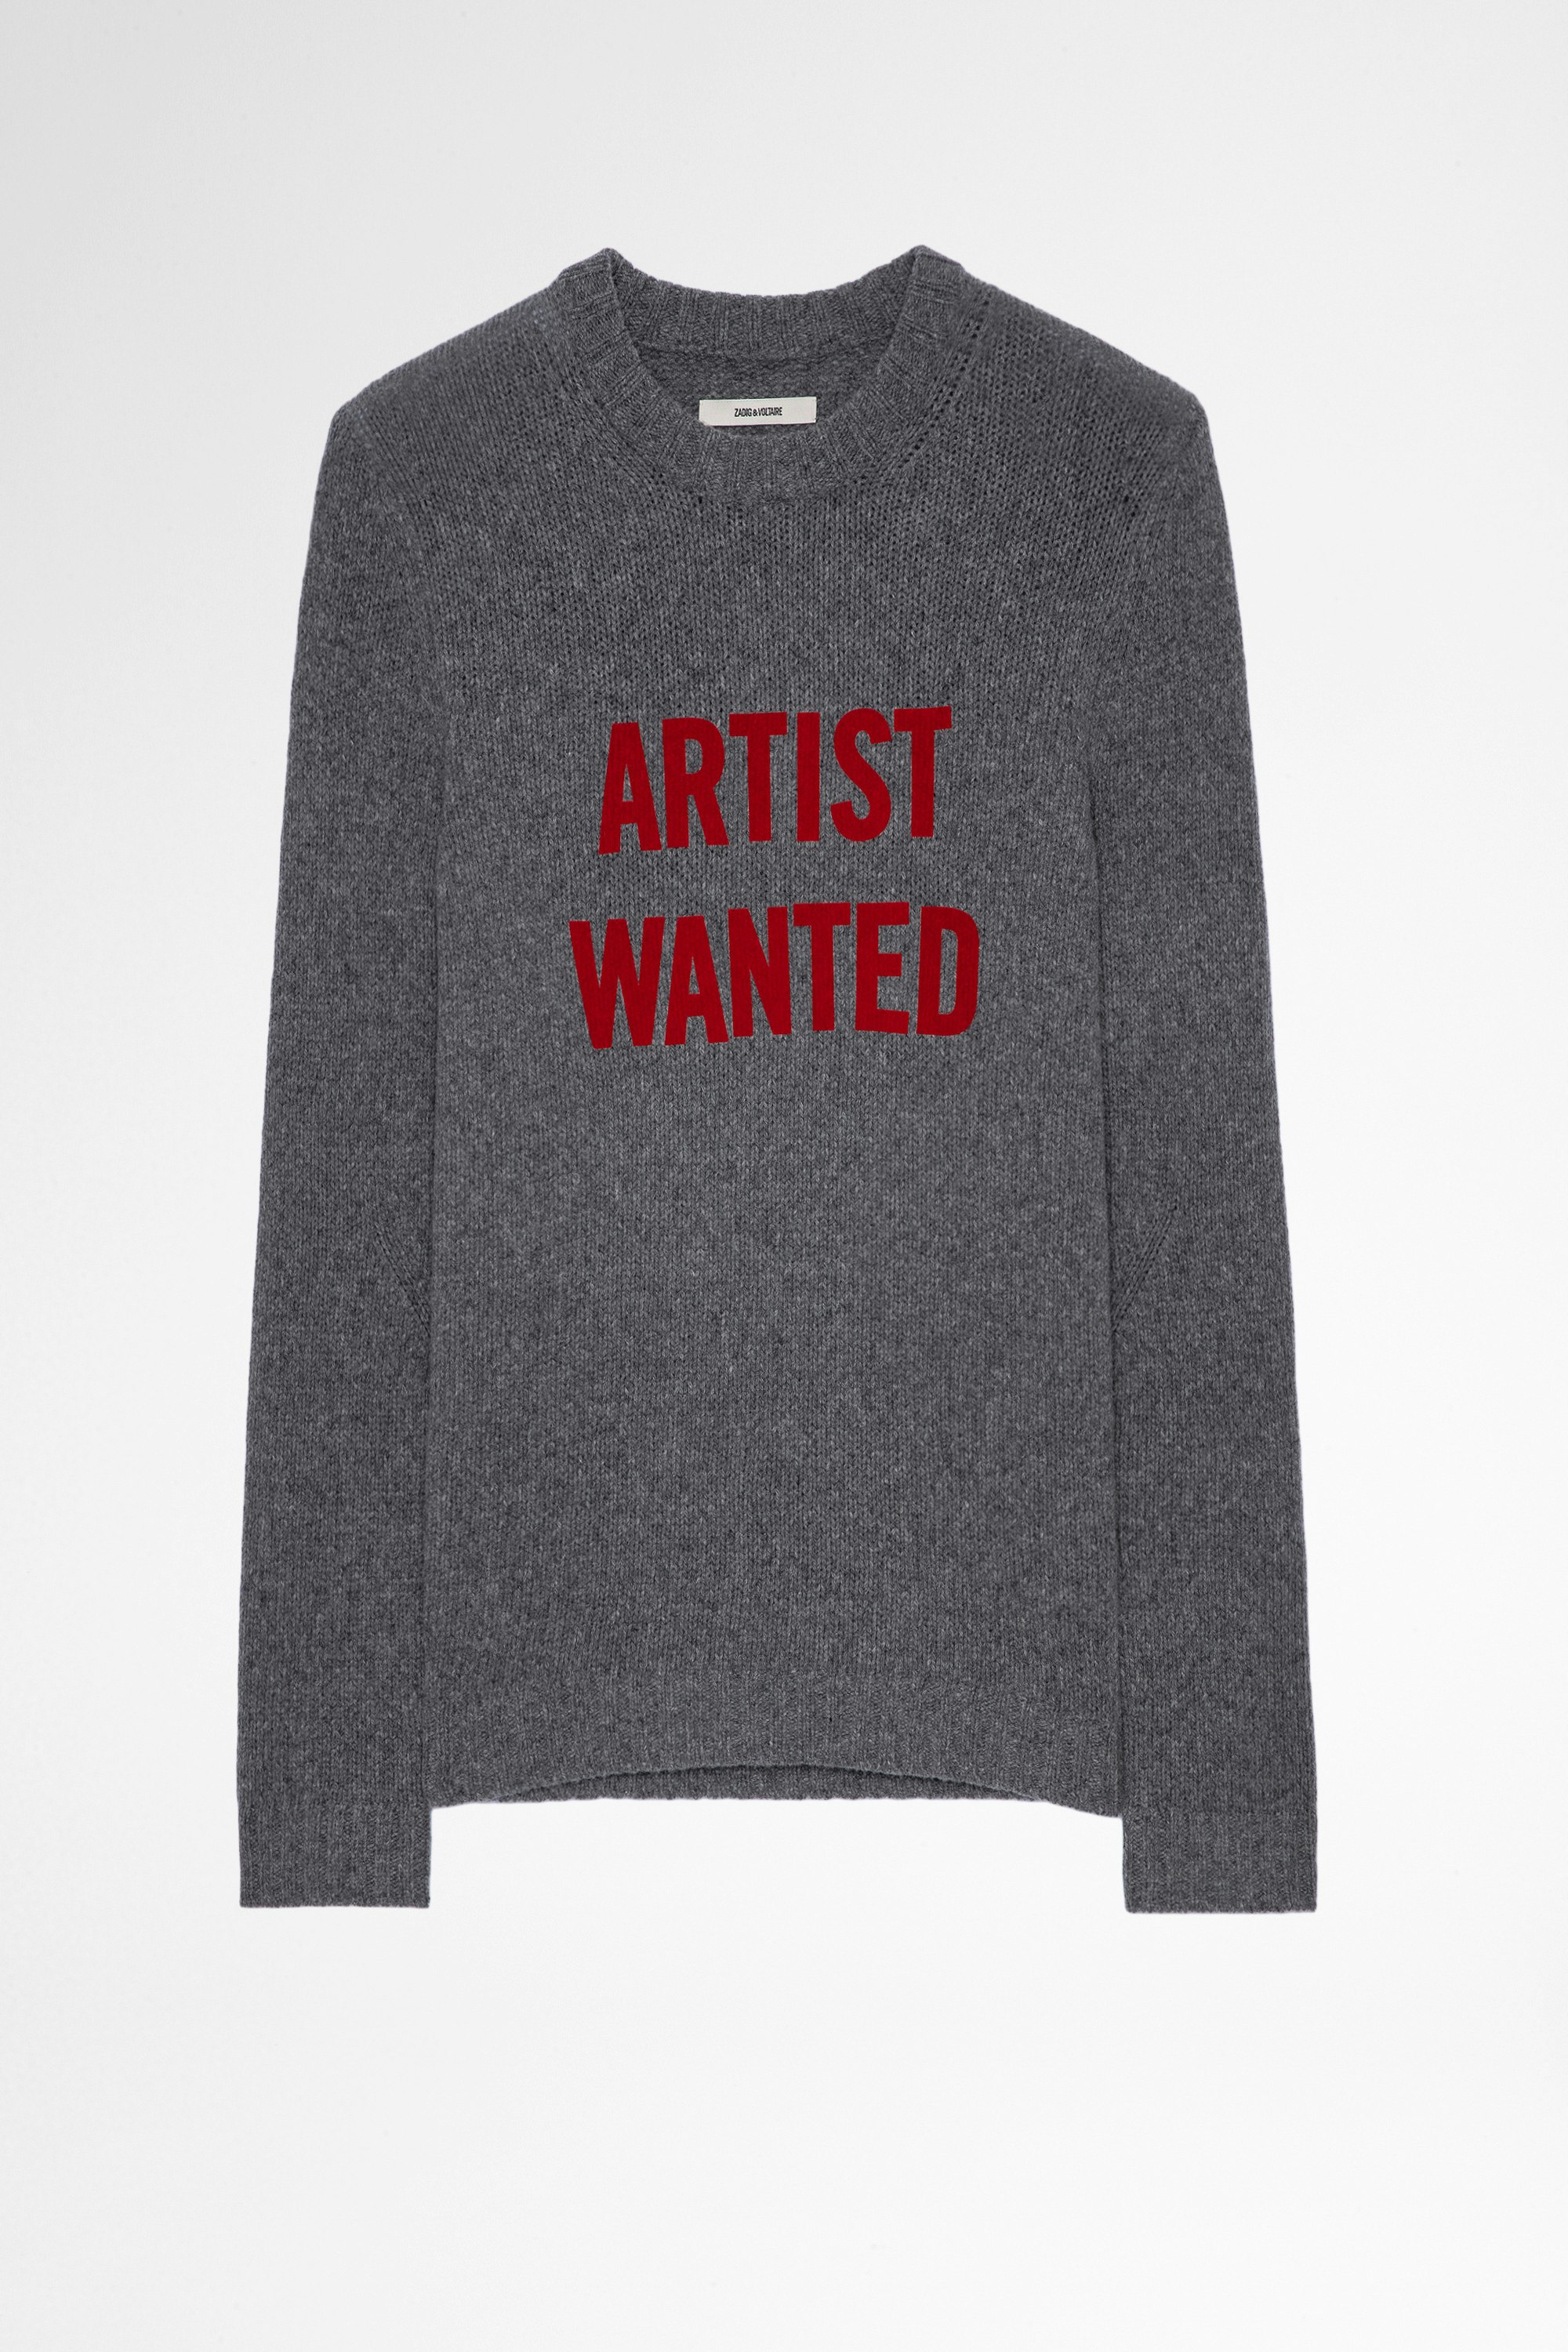 Pull Kennedy Artist Wanted Pull en mérinos gris Artis Wanted Homme